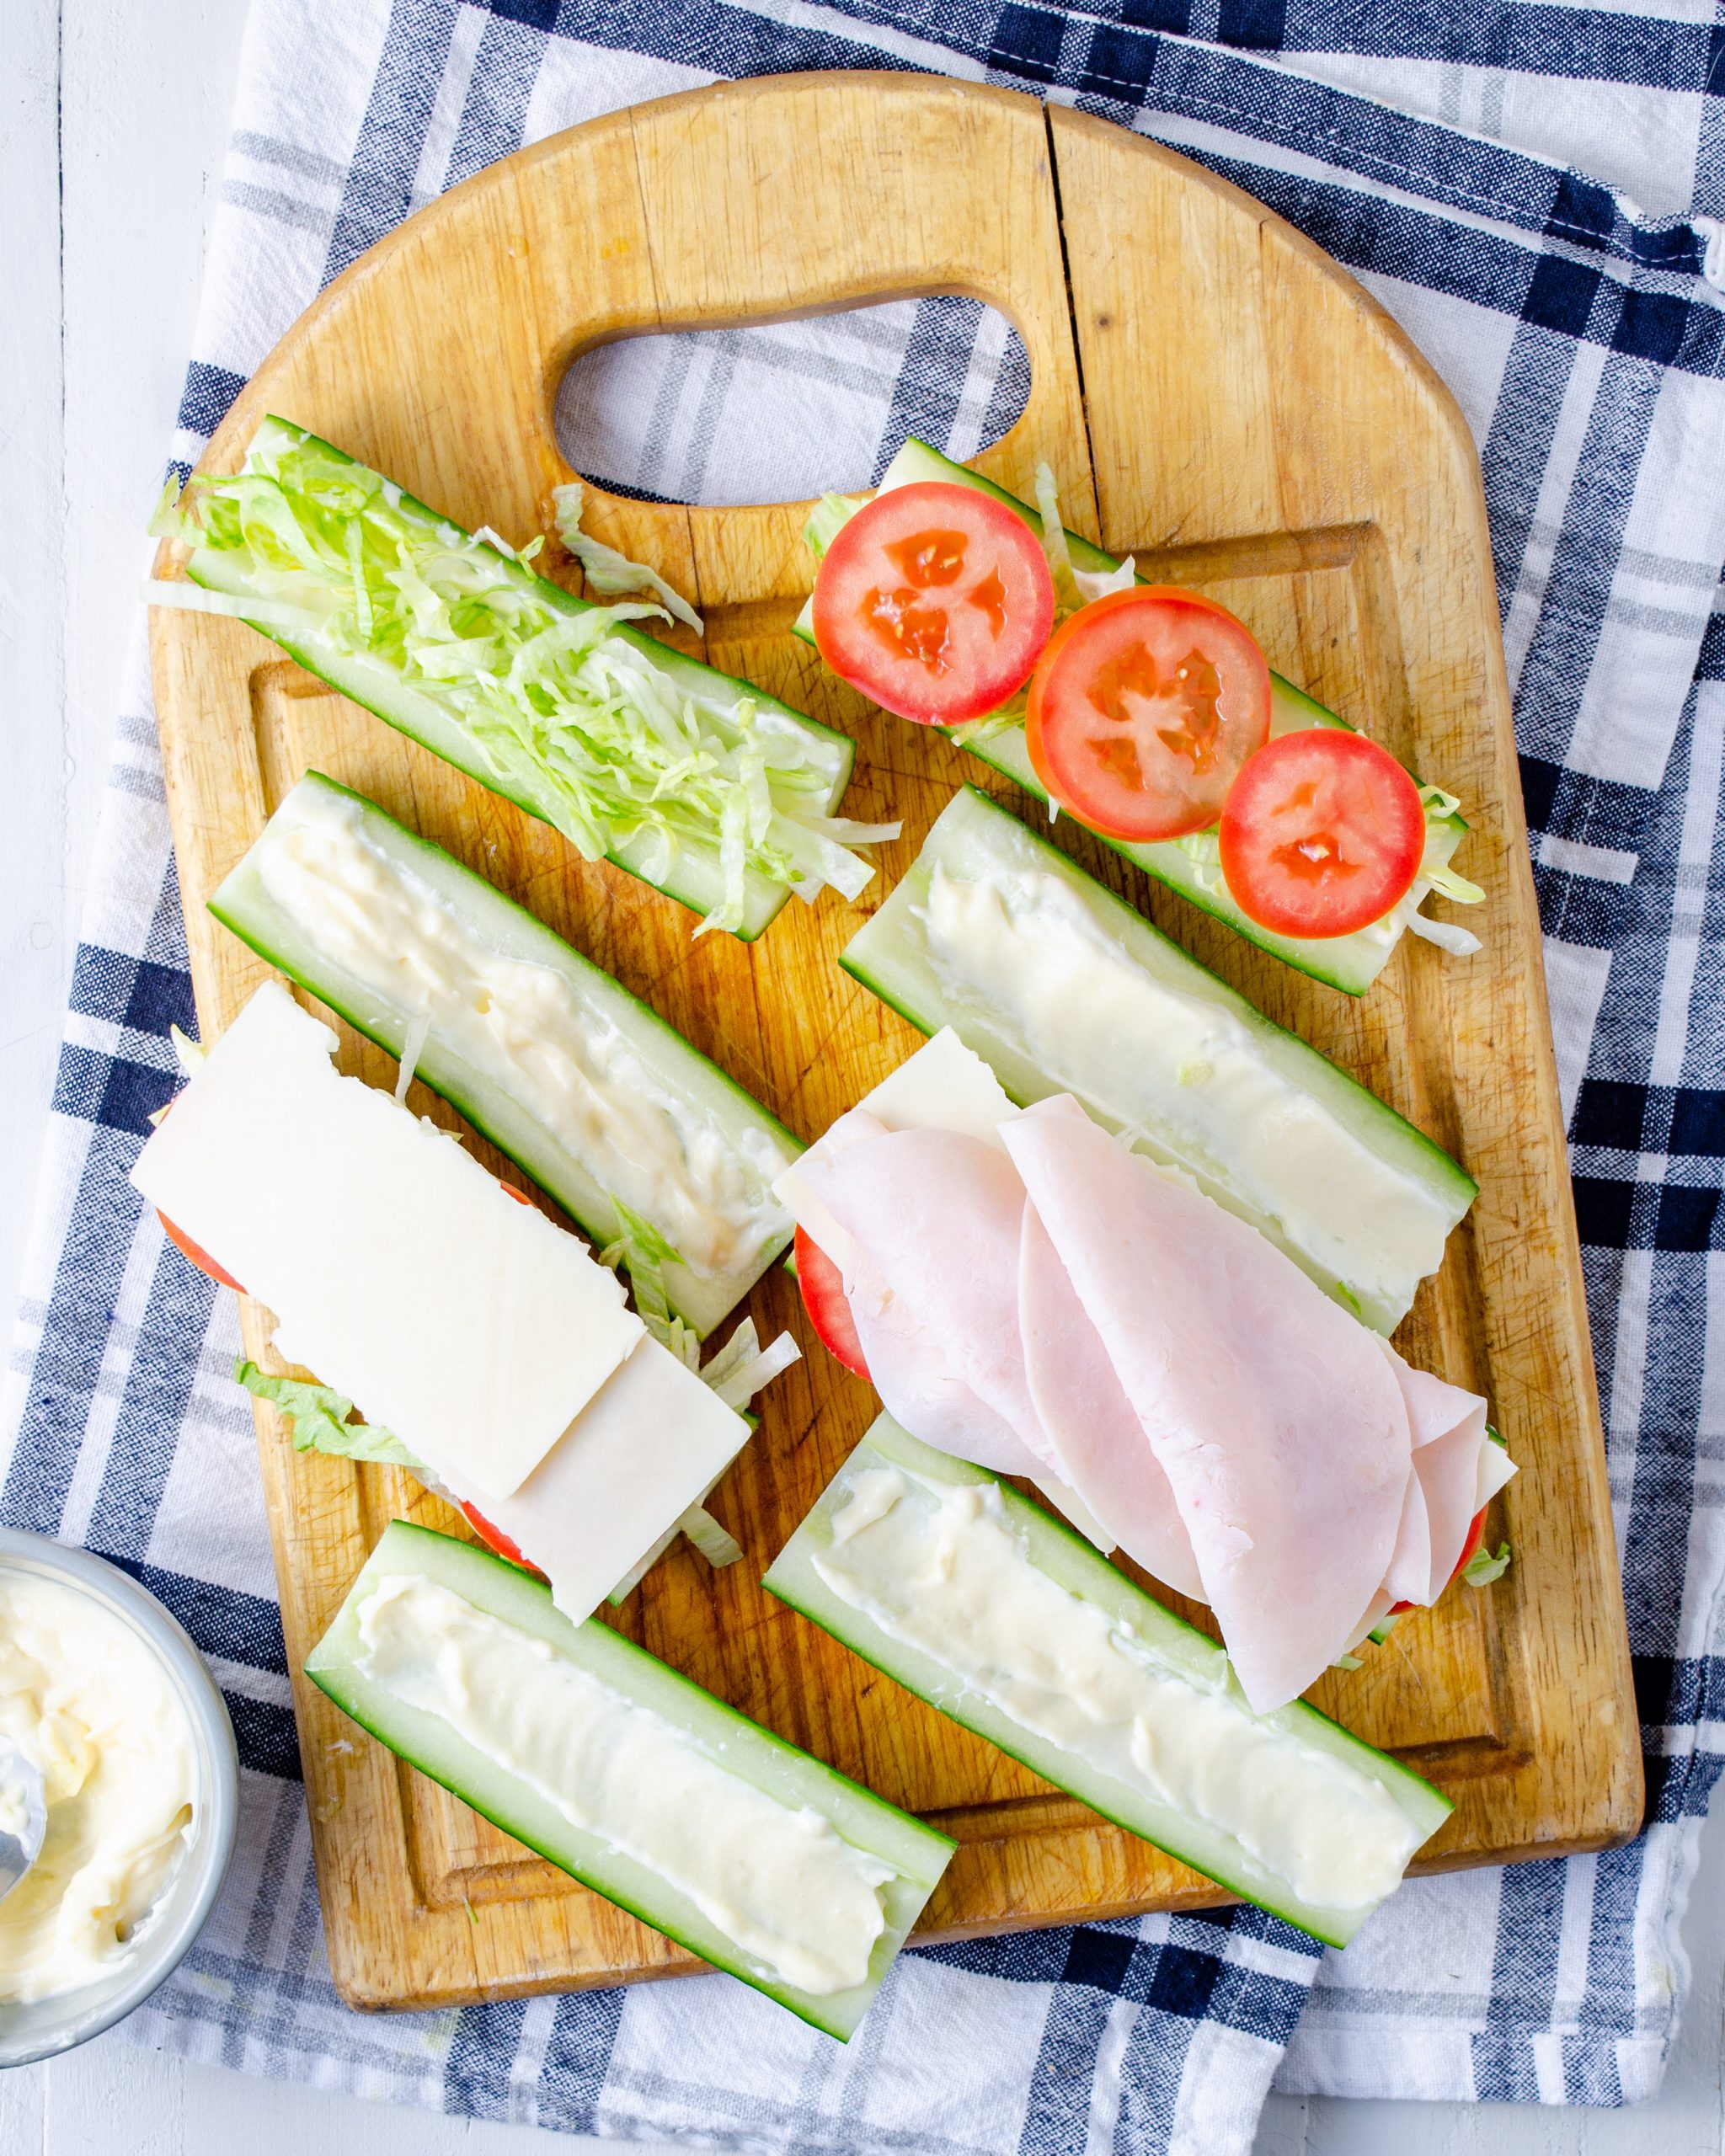 Top that half with tomatoes, lettuce, a slice of cheese cut in half, and ¼ of the lunch meat. 